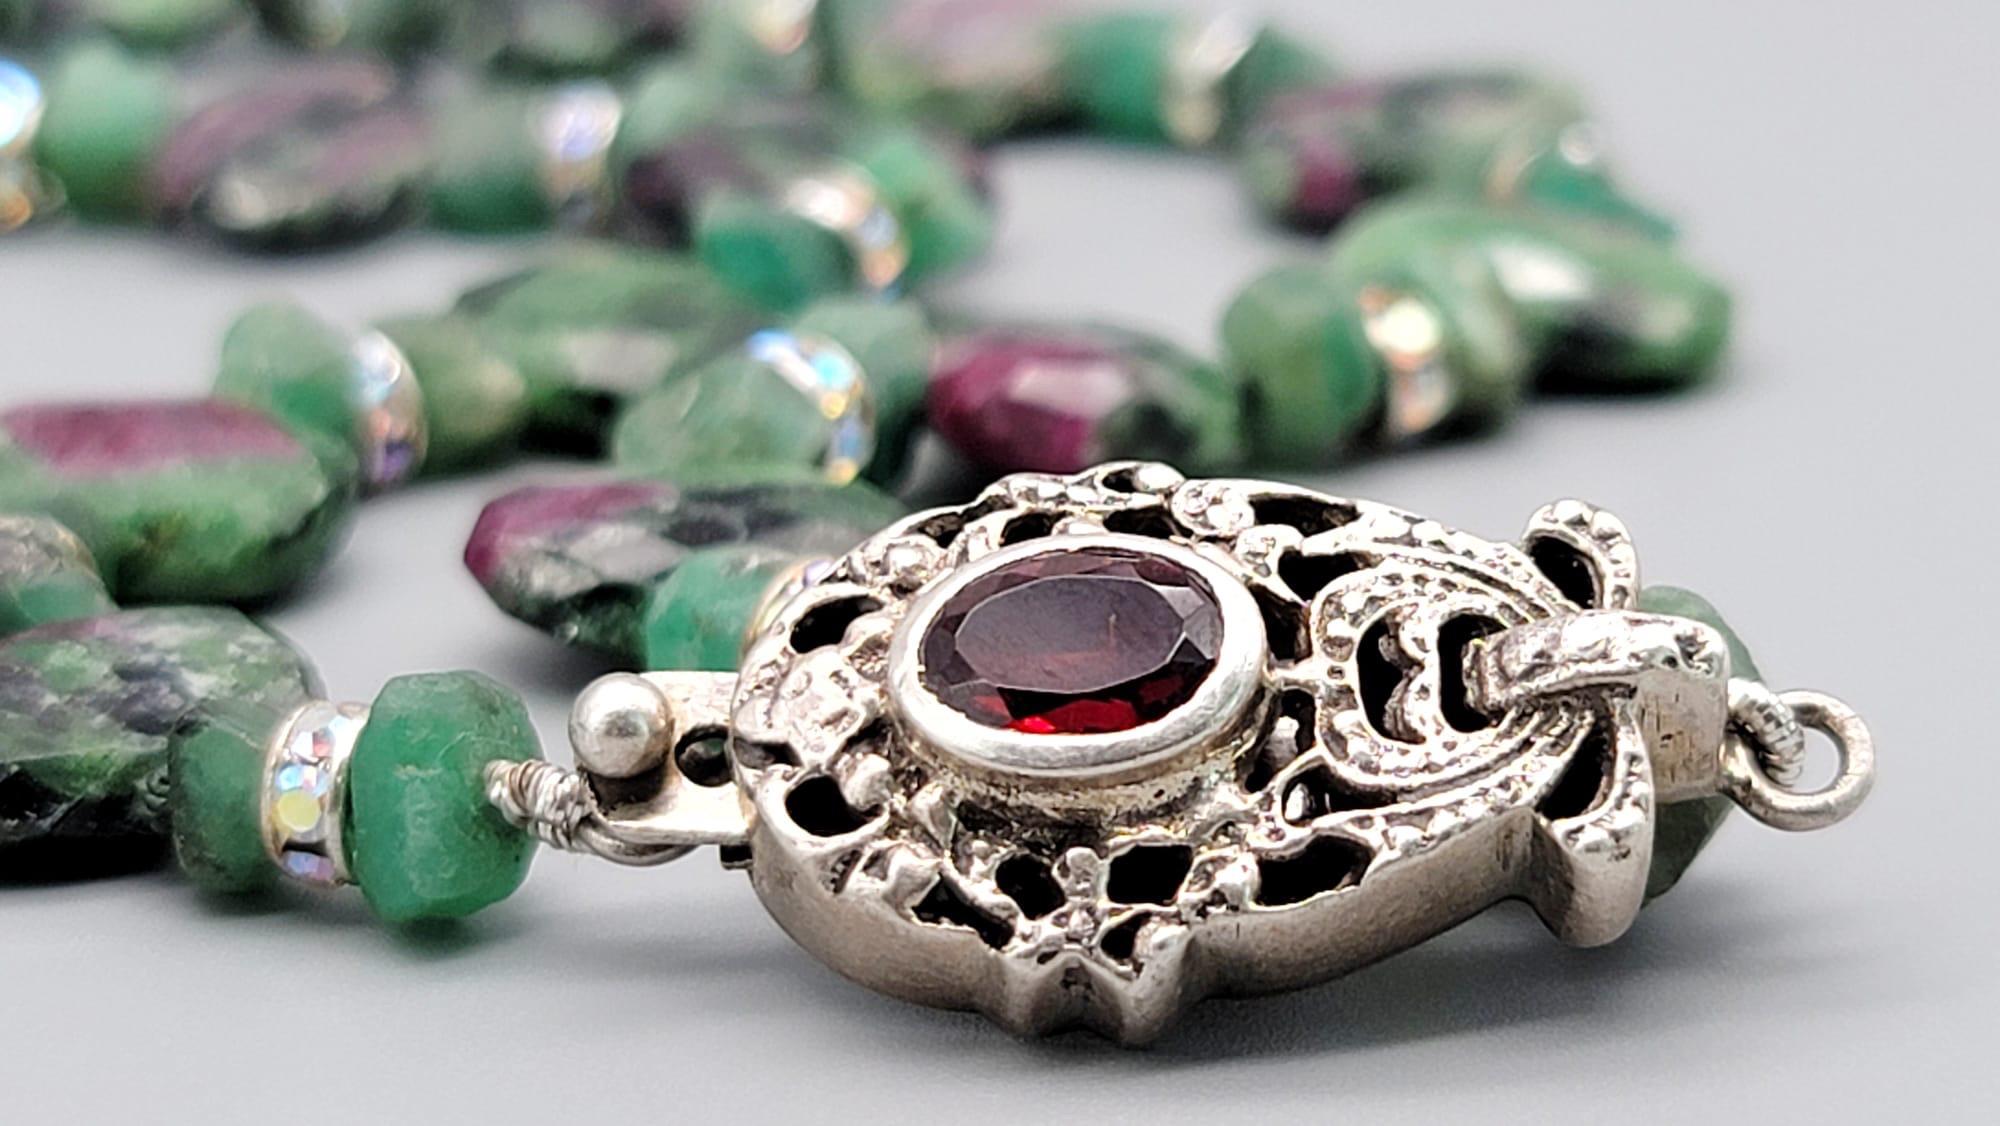 A.Jeschel Ruby in Zoisite and Emerald necklace. 3